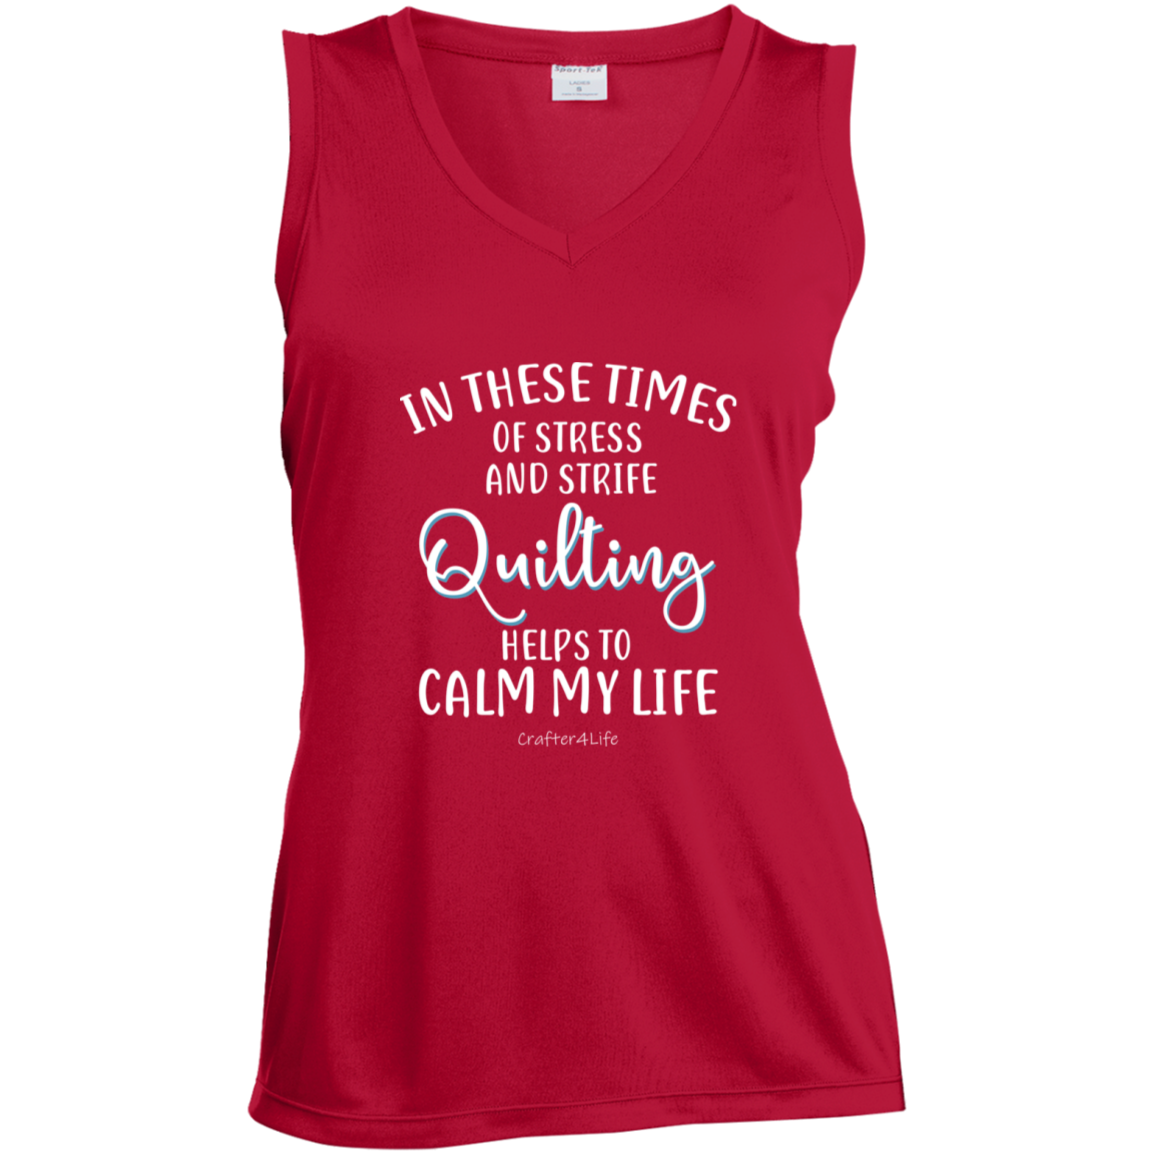 Quilting Helps to Calm My Life Ladies' Sleeveless Moisture Absorbing V-Neck